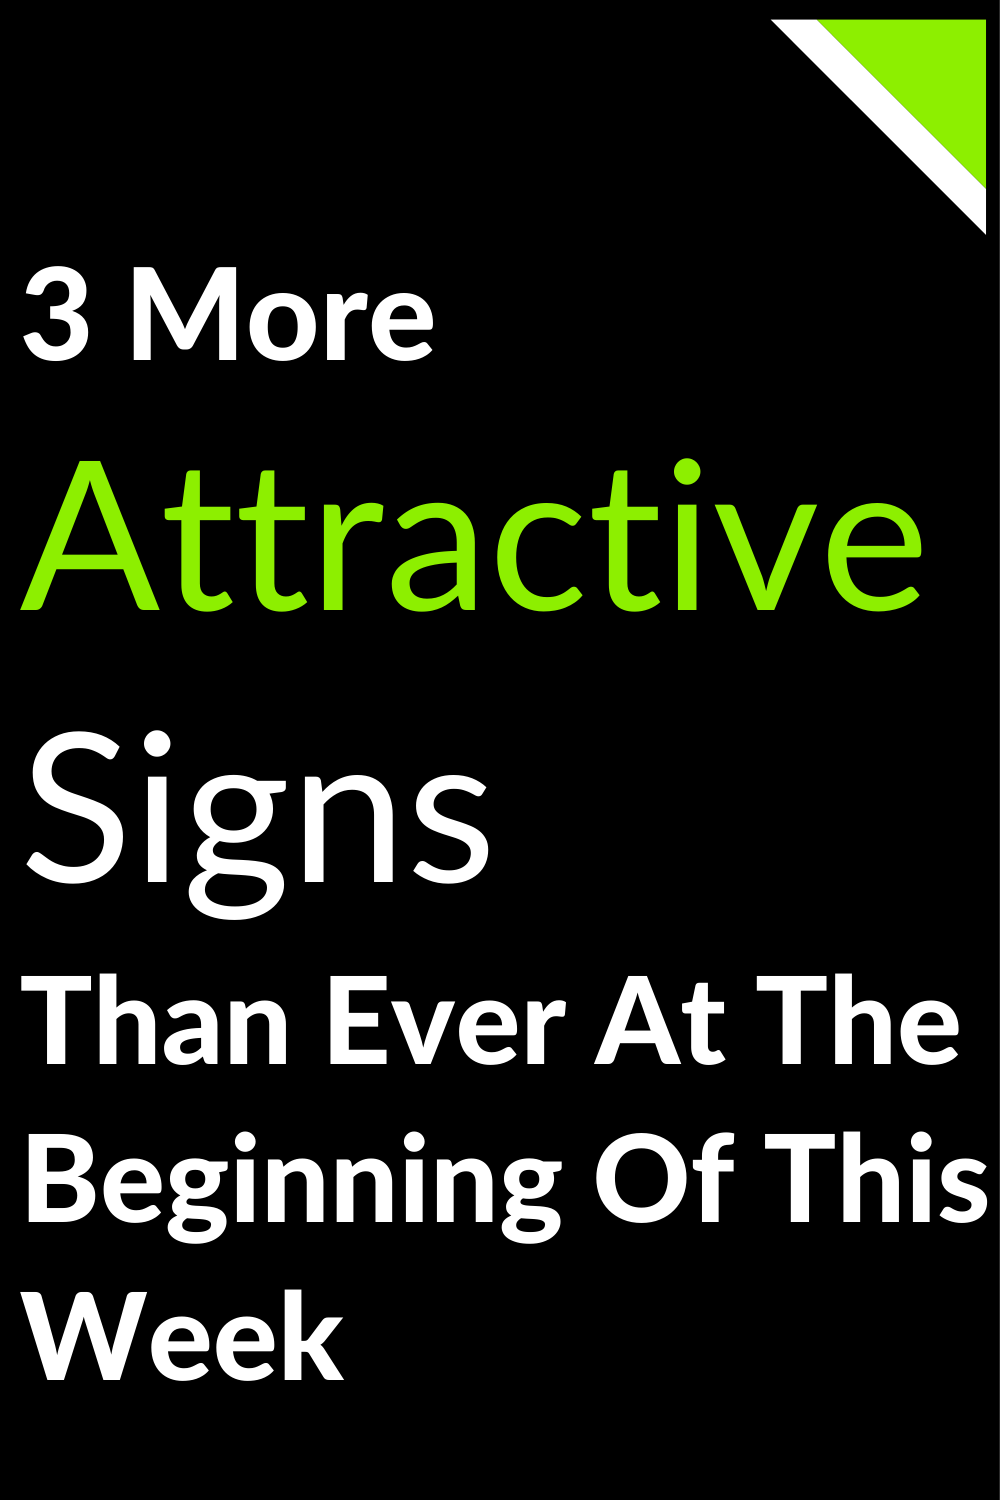 3 More Attractive Signs Than Ever At The Beginning Of This Week